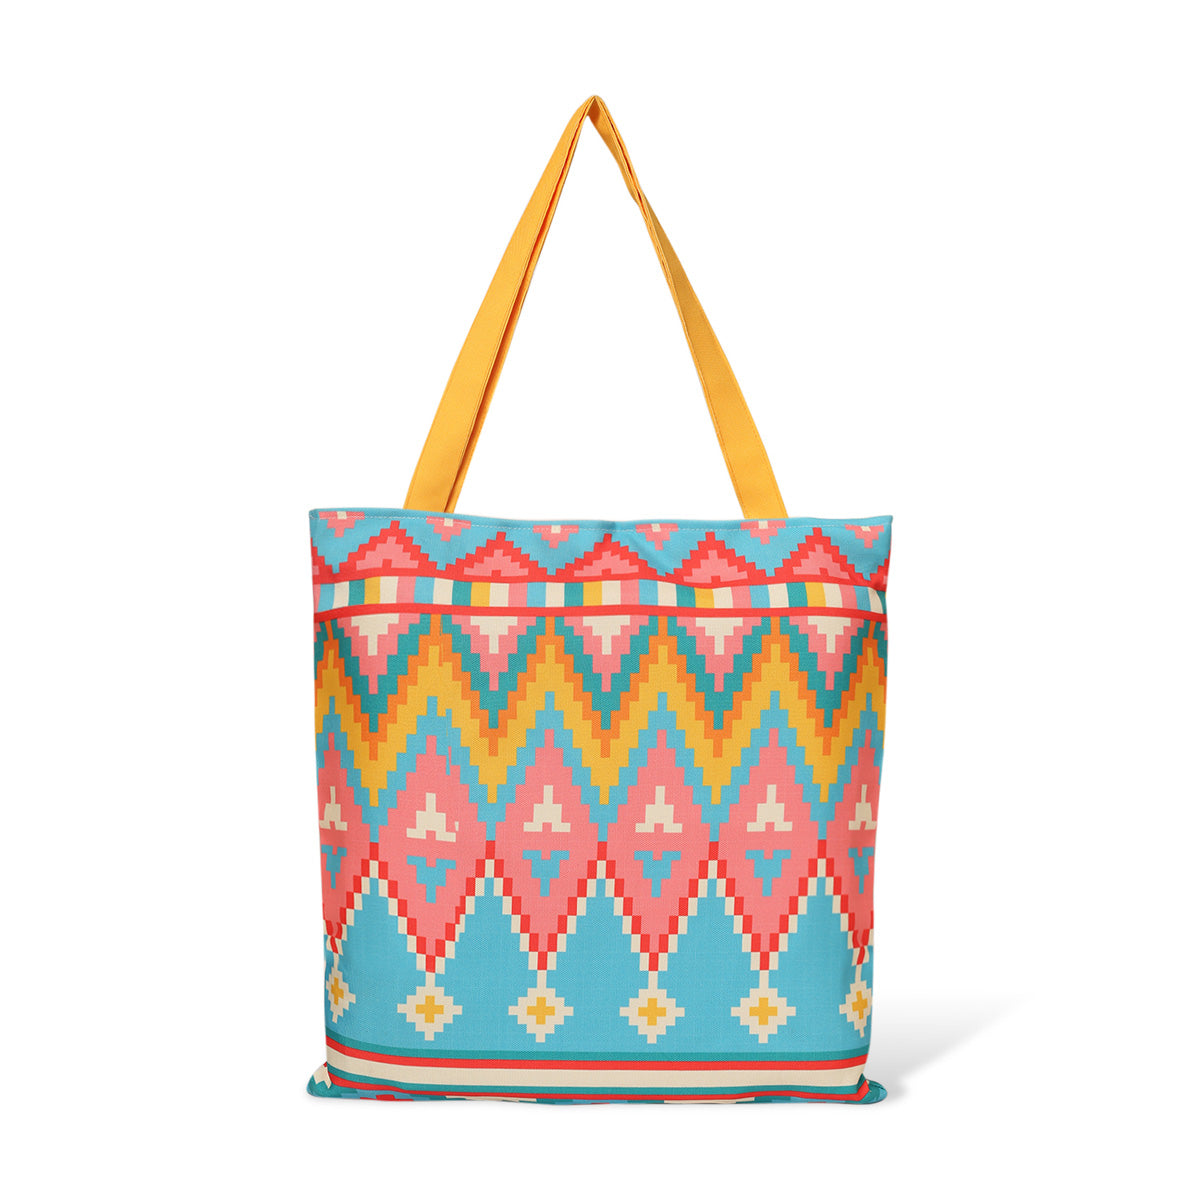 Colorful tote bag with geometric pattern.